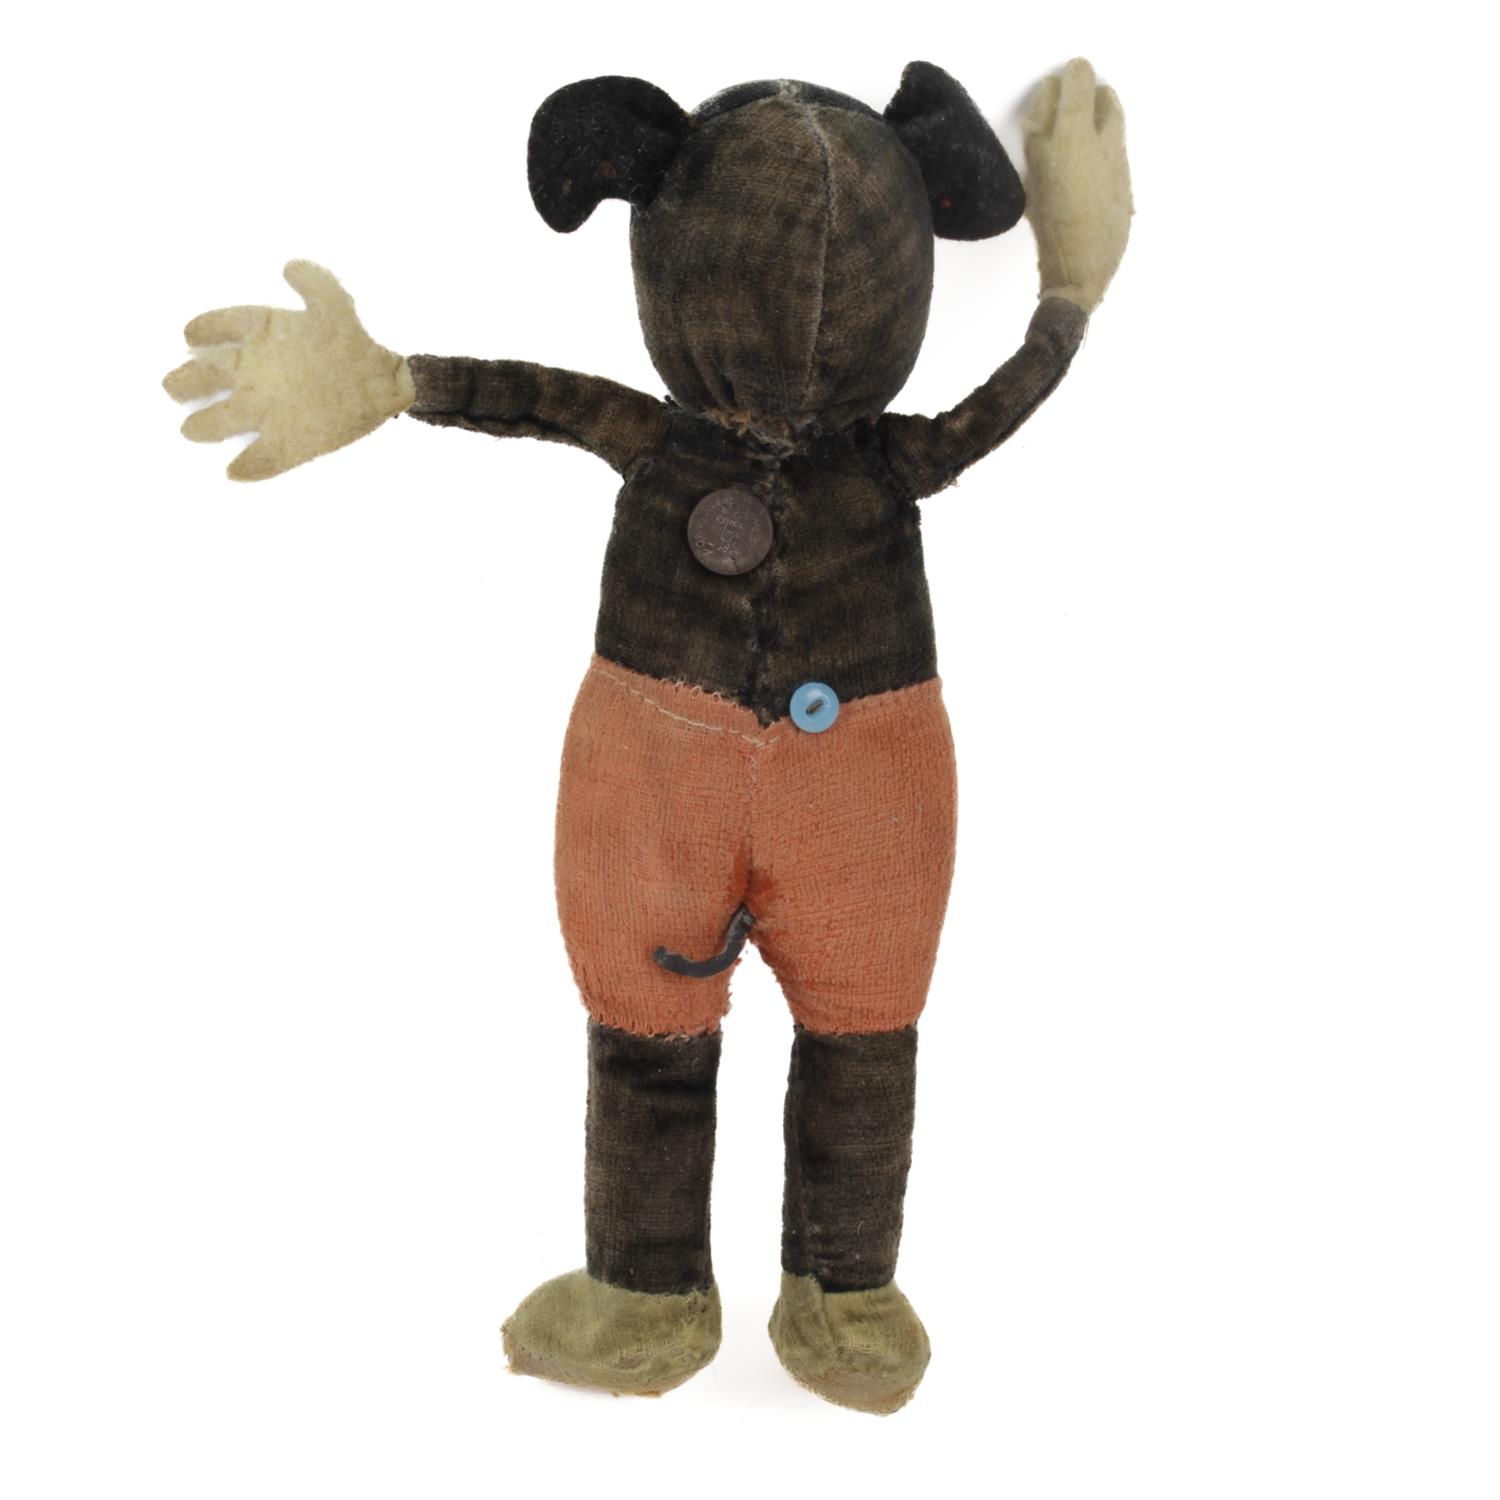 Dean's Rag Company Mickey Mouse doll - Image 2 of 2